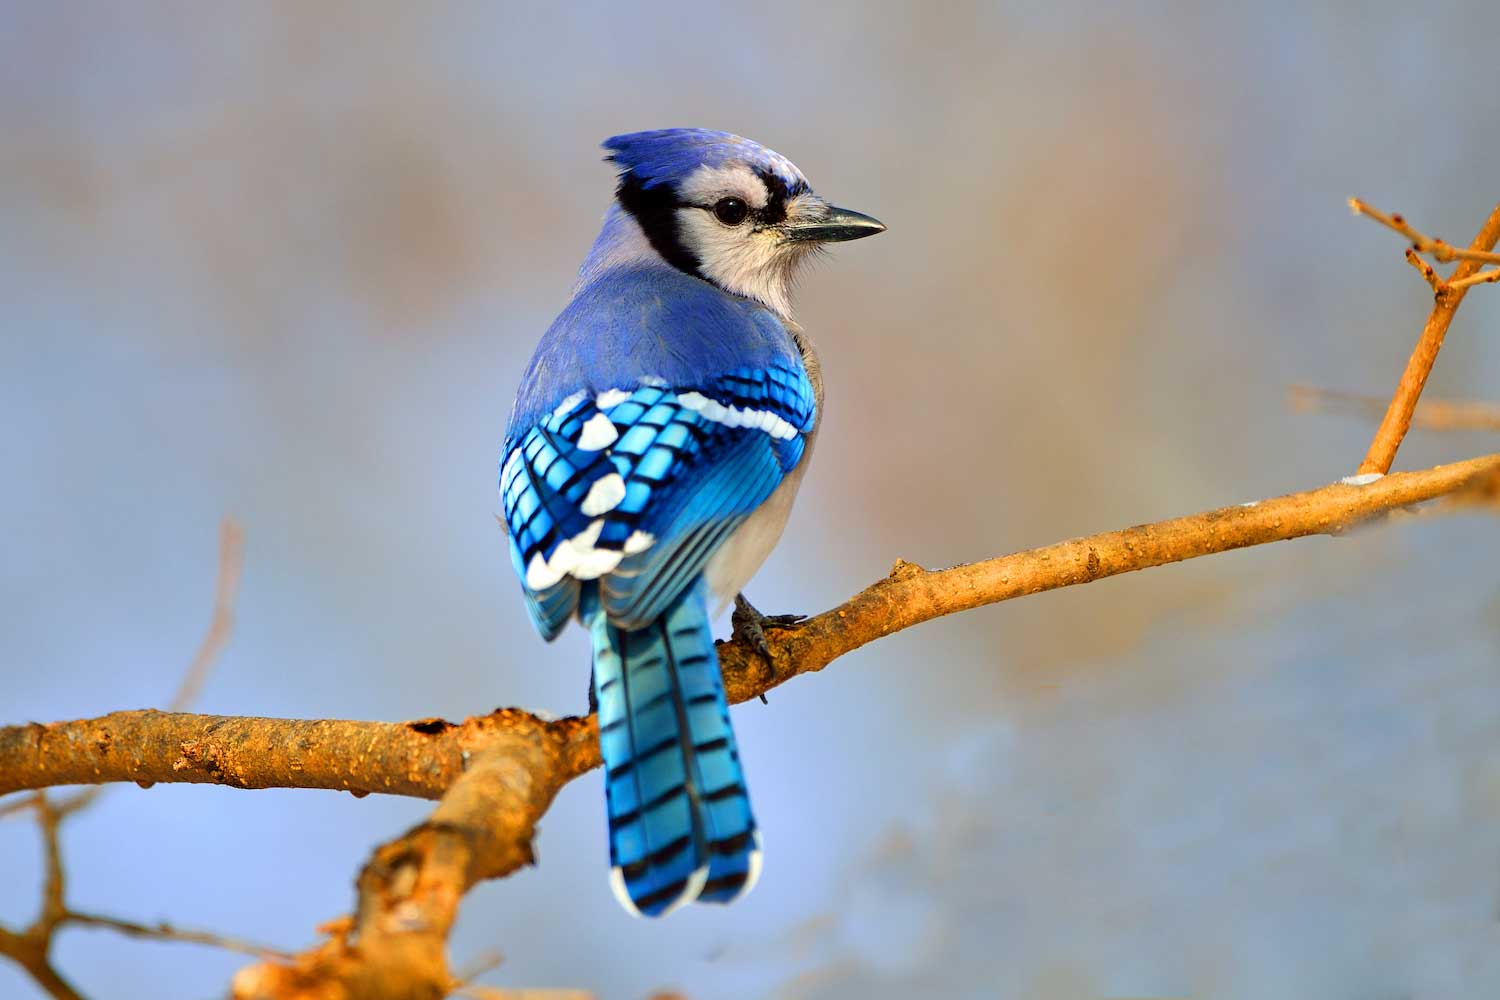 A blue jay perched on a branch.